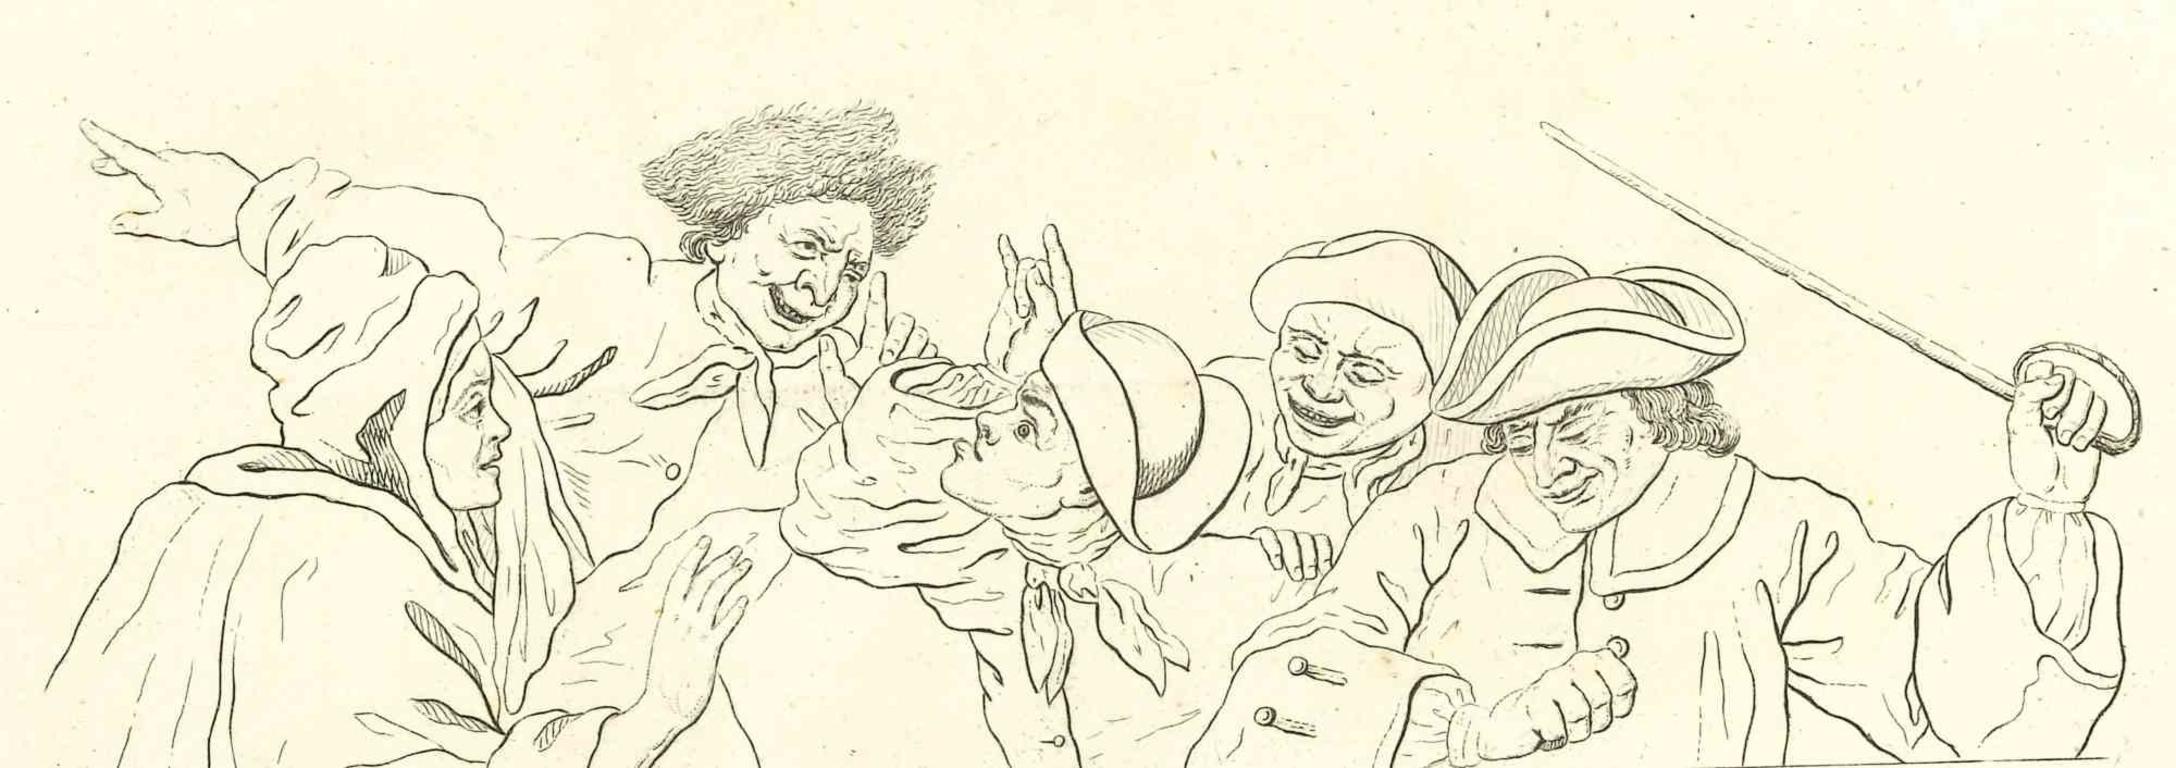 Grotesque Scene is an original artwork realized by Thomas Holloway for Johann Caspar Lavater's  "Essays on Physiognomy, Designed to promote the Knowledge and the Love of Mankind", London, Bensley, 1810. 

This artwork portrays historical faces. On